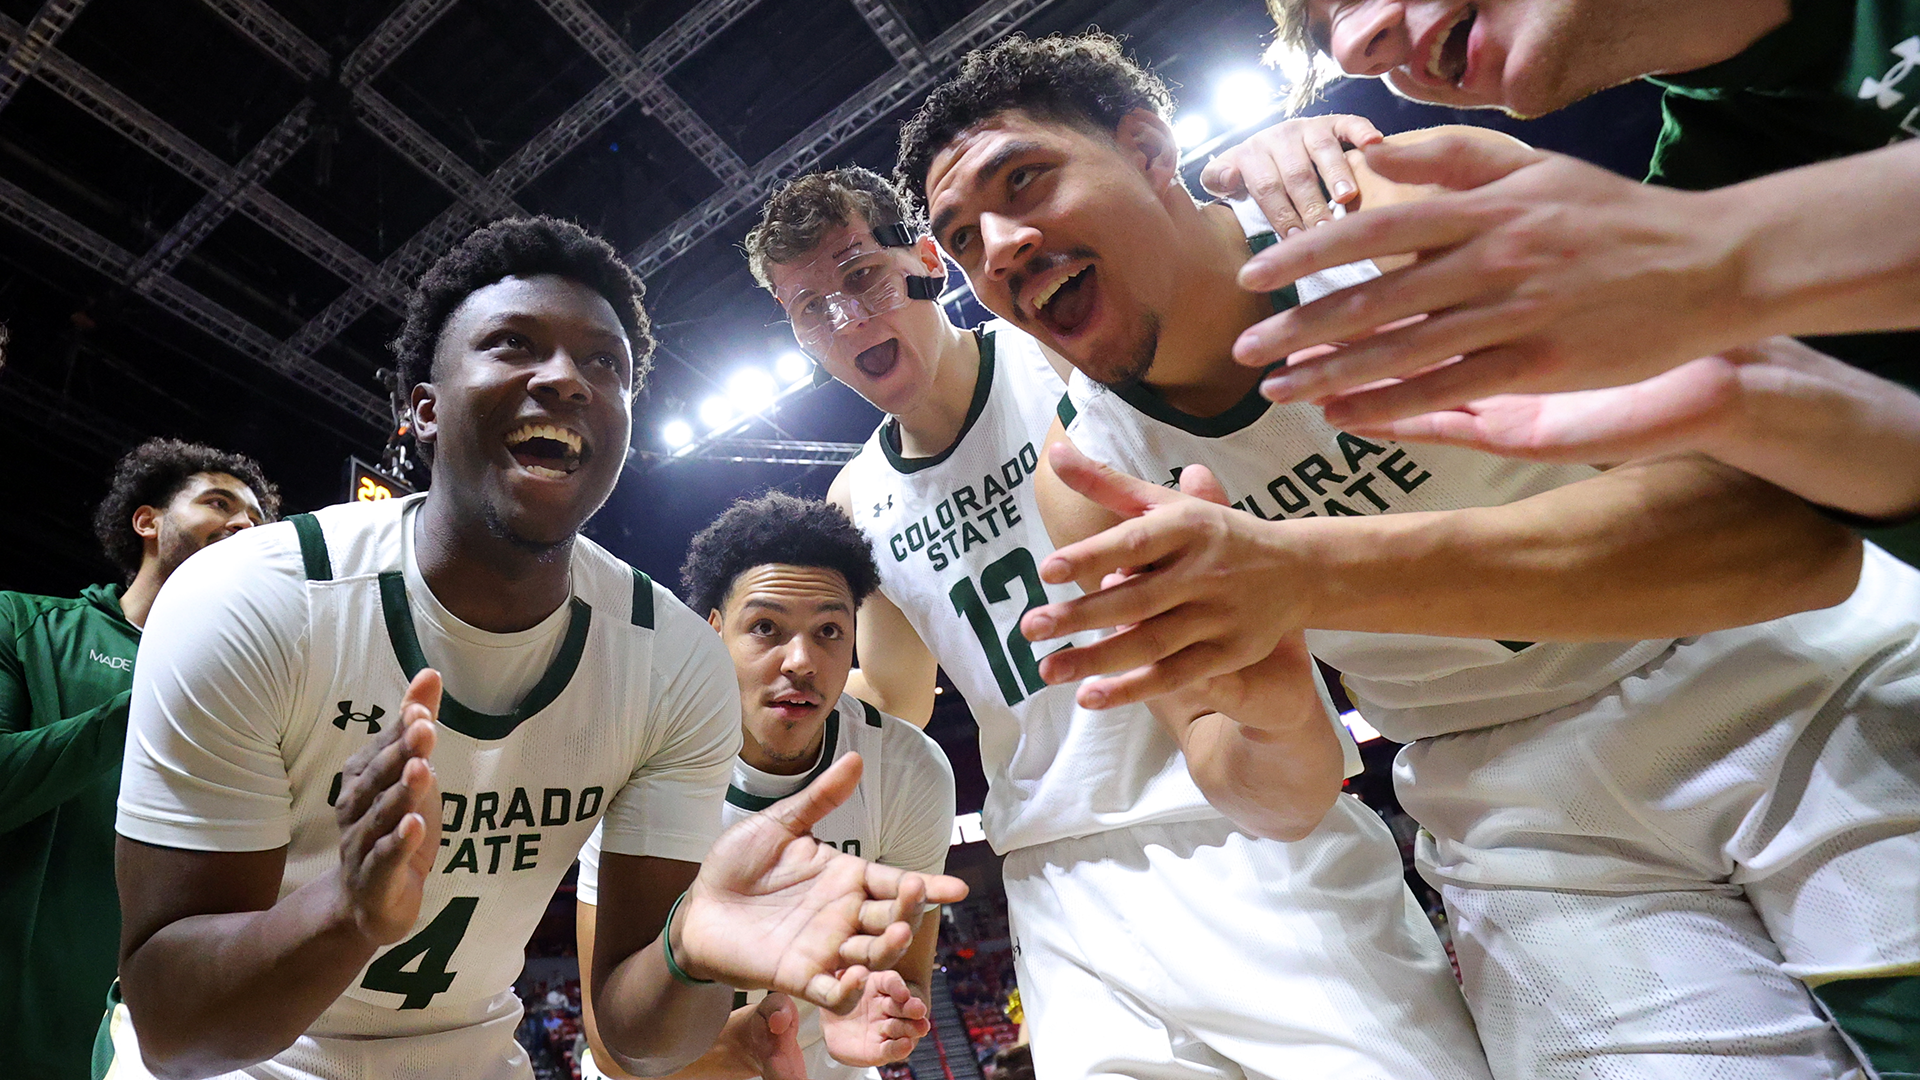 Colorado State Moves on to MW Championship Quarterfinals